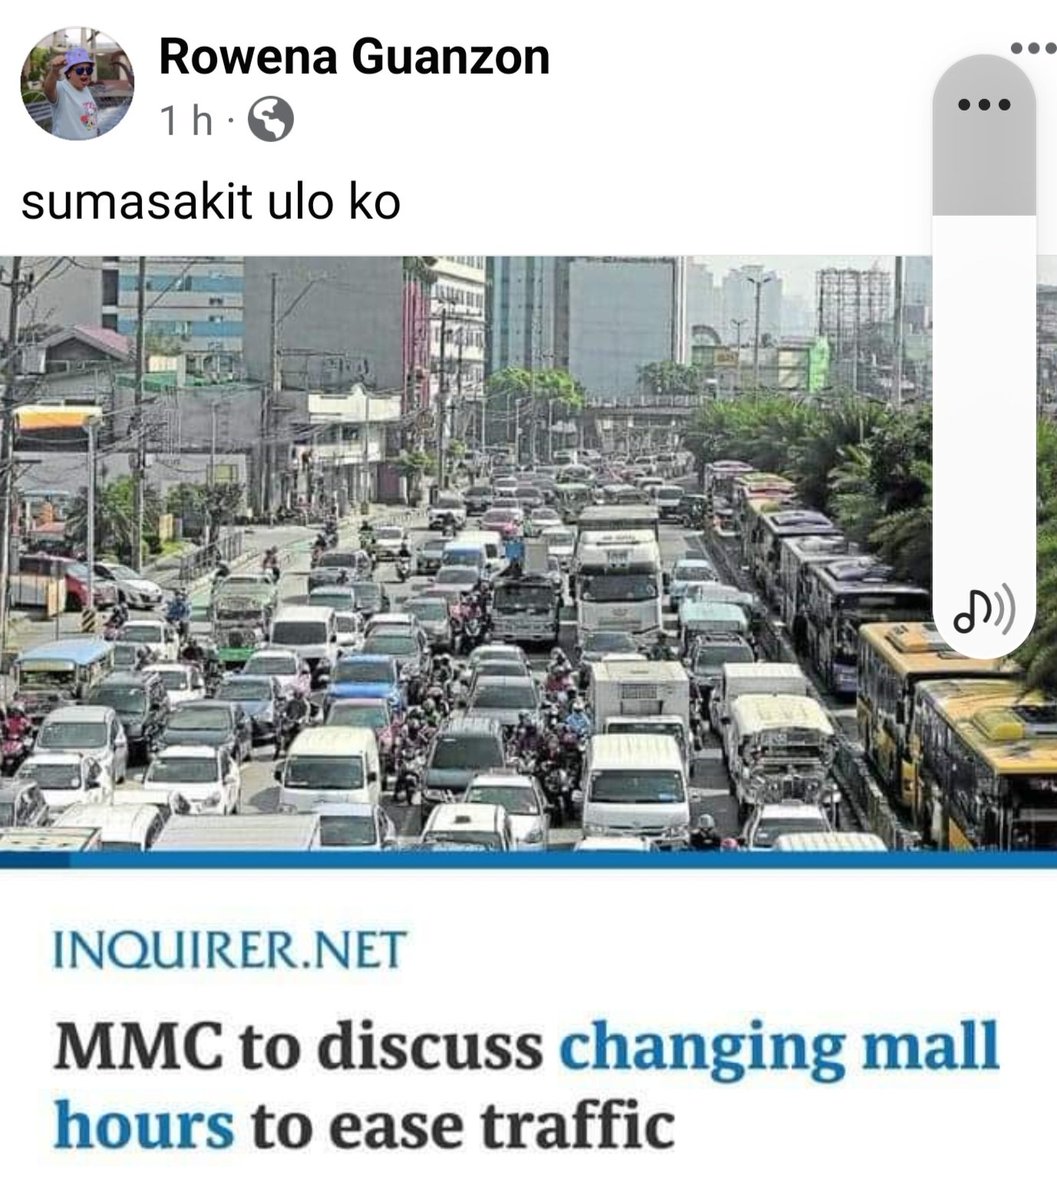 Mga inutil. Walang pagasa. Why not improve public transportation, zero corruption, work from home, etc.